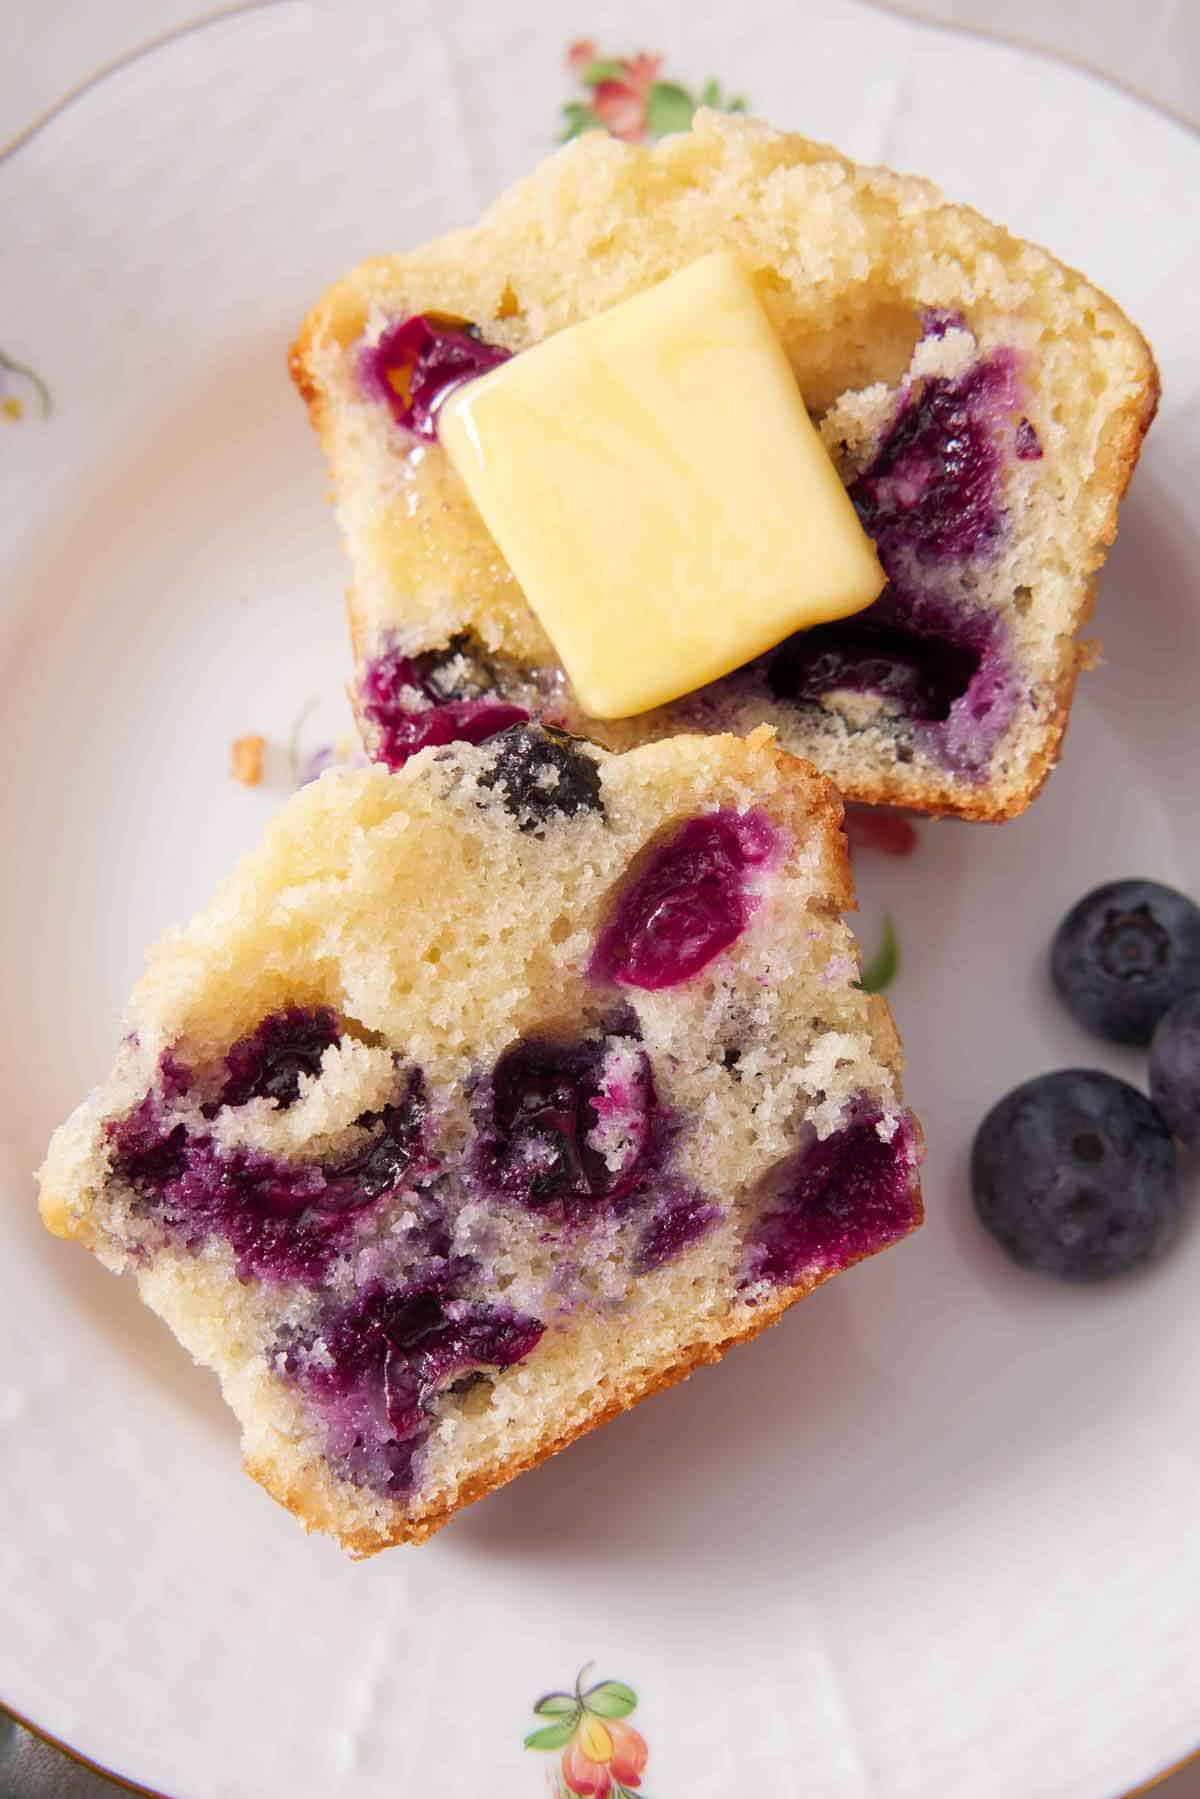 Overhead view of a blueberry muffin cut in half with a knob of butter on top.